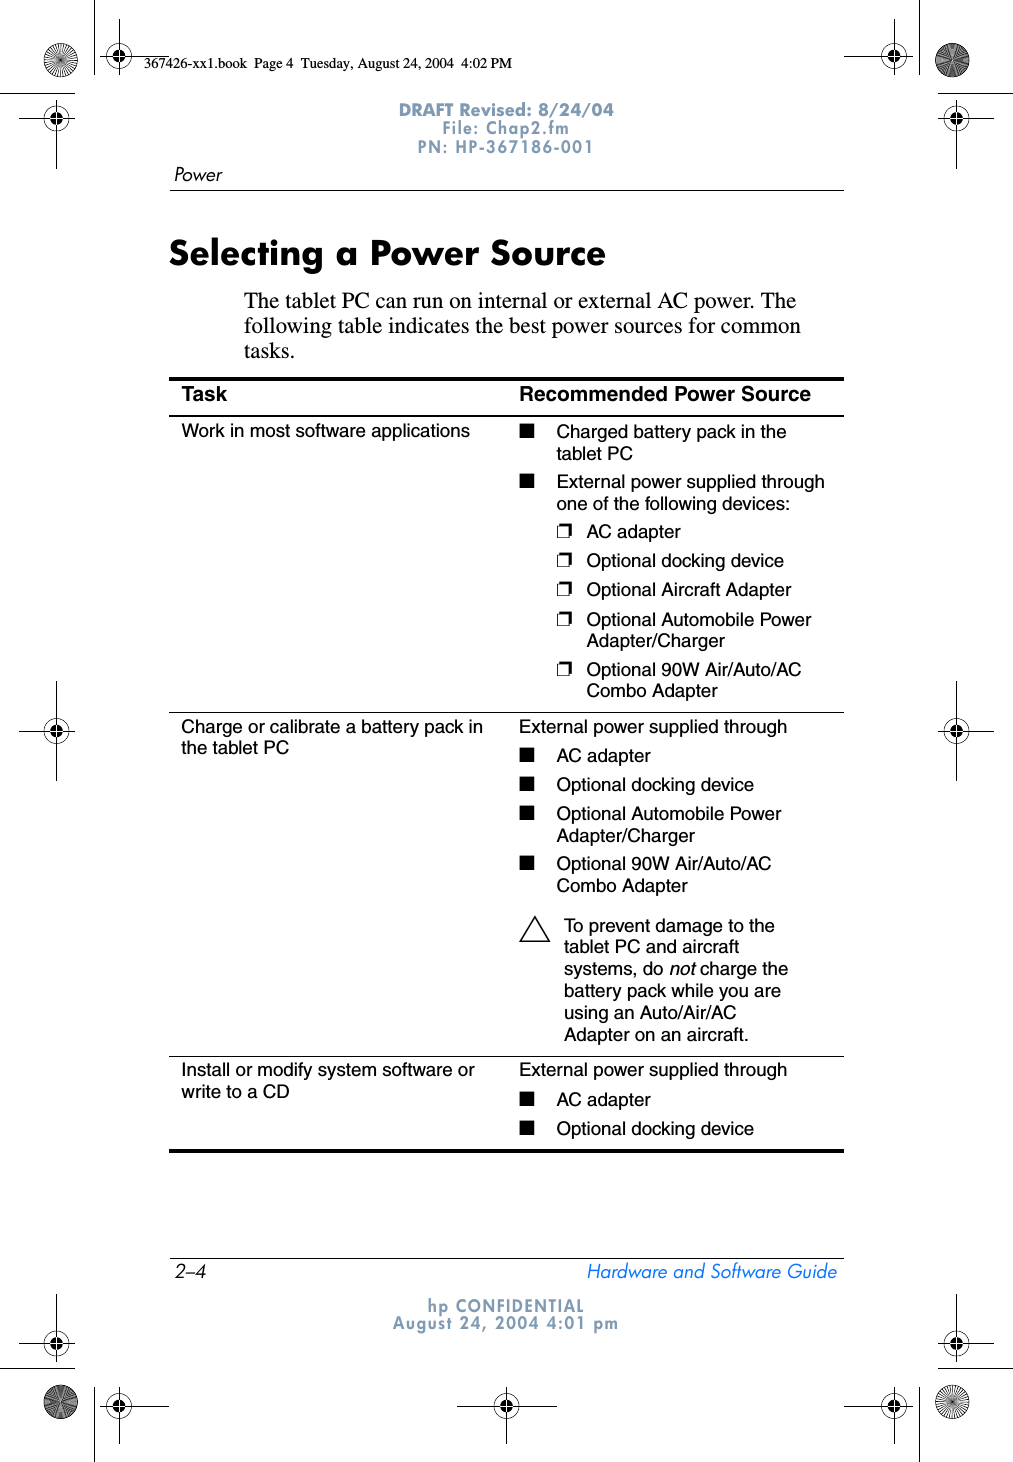 2–4 Hardware and Software GuidePowerDRAFT Revised: 8/24/04File: Chap2.fm PN: HP-367186-001 hp CONFIDENTIALAugust 24, 2004 4:01 pmSelecting a Power SourceThe tablet PC can run on internal or external AC power. The following table indicates the best power sources for common tasks.Task Recommended Power SourceWork in most software applications ■Charged battery pack in the tablet PC■External power supplied through one of the following devices:❐AC adapter❐Optional docking device❐Optional Aircraft Adapter❐Optional Automobile Power Adapter/Charger❐Optional 90W Air/Auto/AC Combo AdapterCharge or calibrate a battery pack in the tablet PCExternal power supplied through■AC adapter■Optional docking device■Optional Automobile Power Adapter/Charger■Optional 90W Air/Auto/AC Combo AdapterÄTo prevent damage to the tablet PC and aircraft systems, do not charge the battery pack while you are using an Auto/Air/AC Adapter on an aircraft. Install or modify system software or write to a CDExternal power supplied through■AC adapter■Optional docking device367426-xx1.book  Page 4  Tuesday, August 24, 2004  4:02 PM